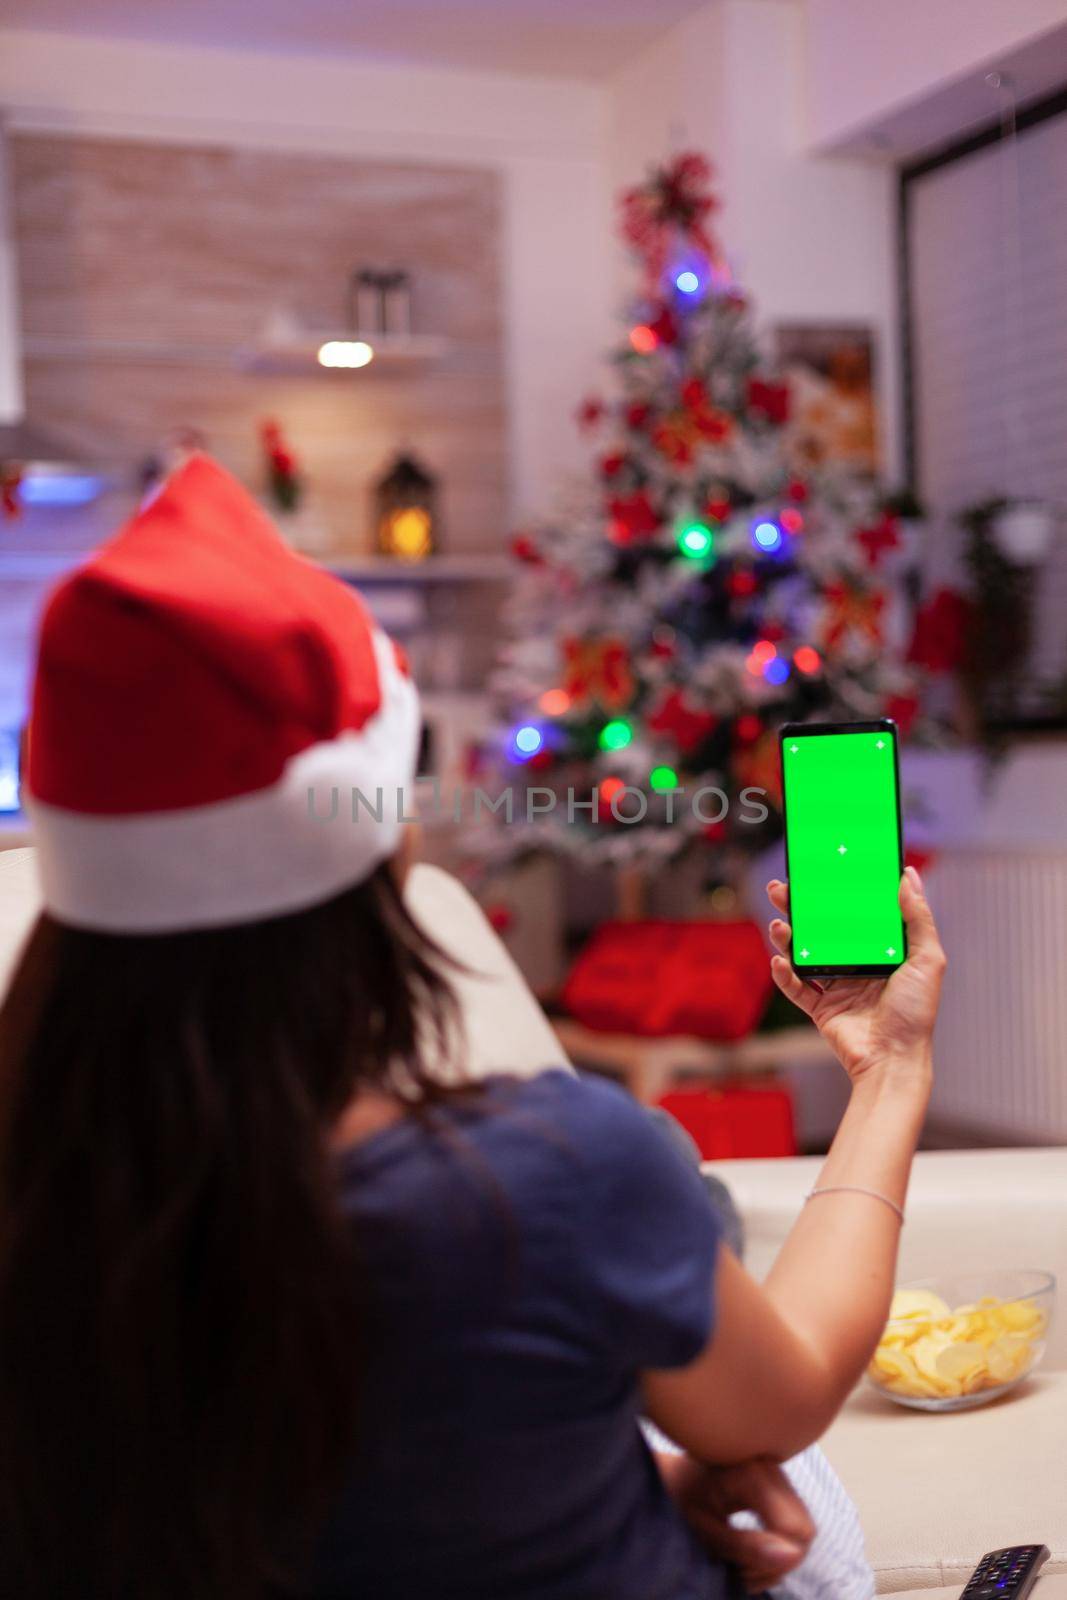 Woman holding green screen mock up chroma key smartphone with isolated display during christmastime in xmas decorated kitchen. Girl enjoying winter season celebrating christmas holiday